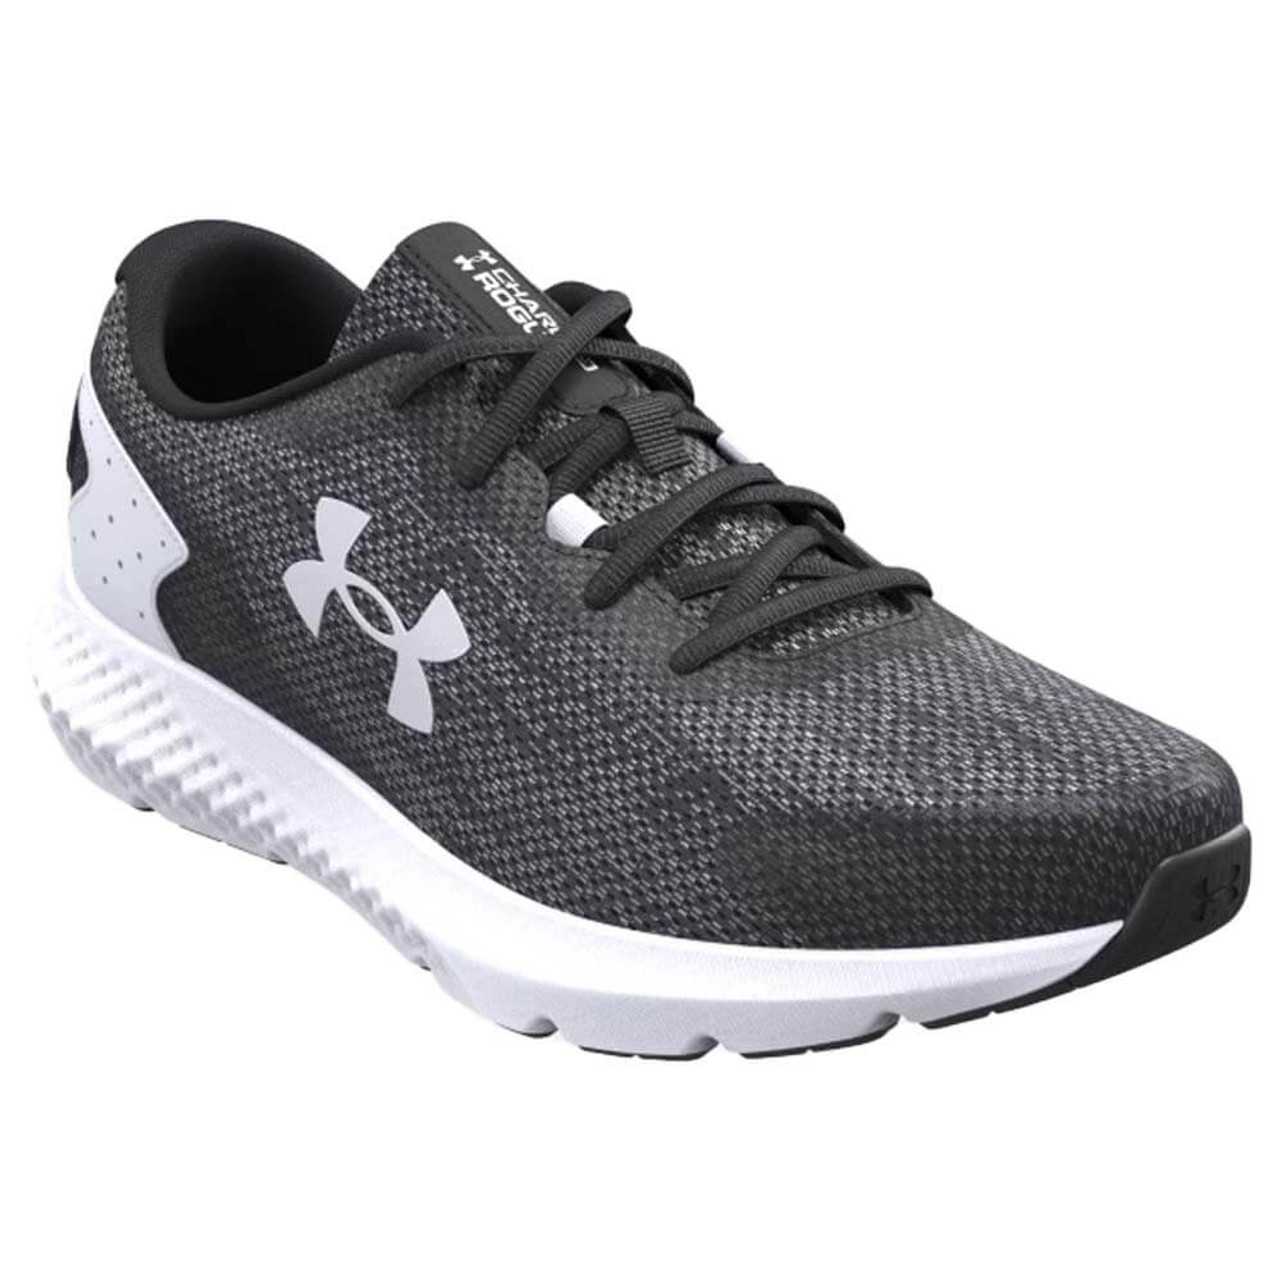 Under Armour Women's Charged Rogue 3 Knit, (001